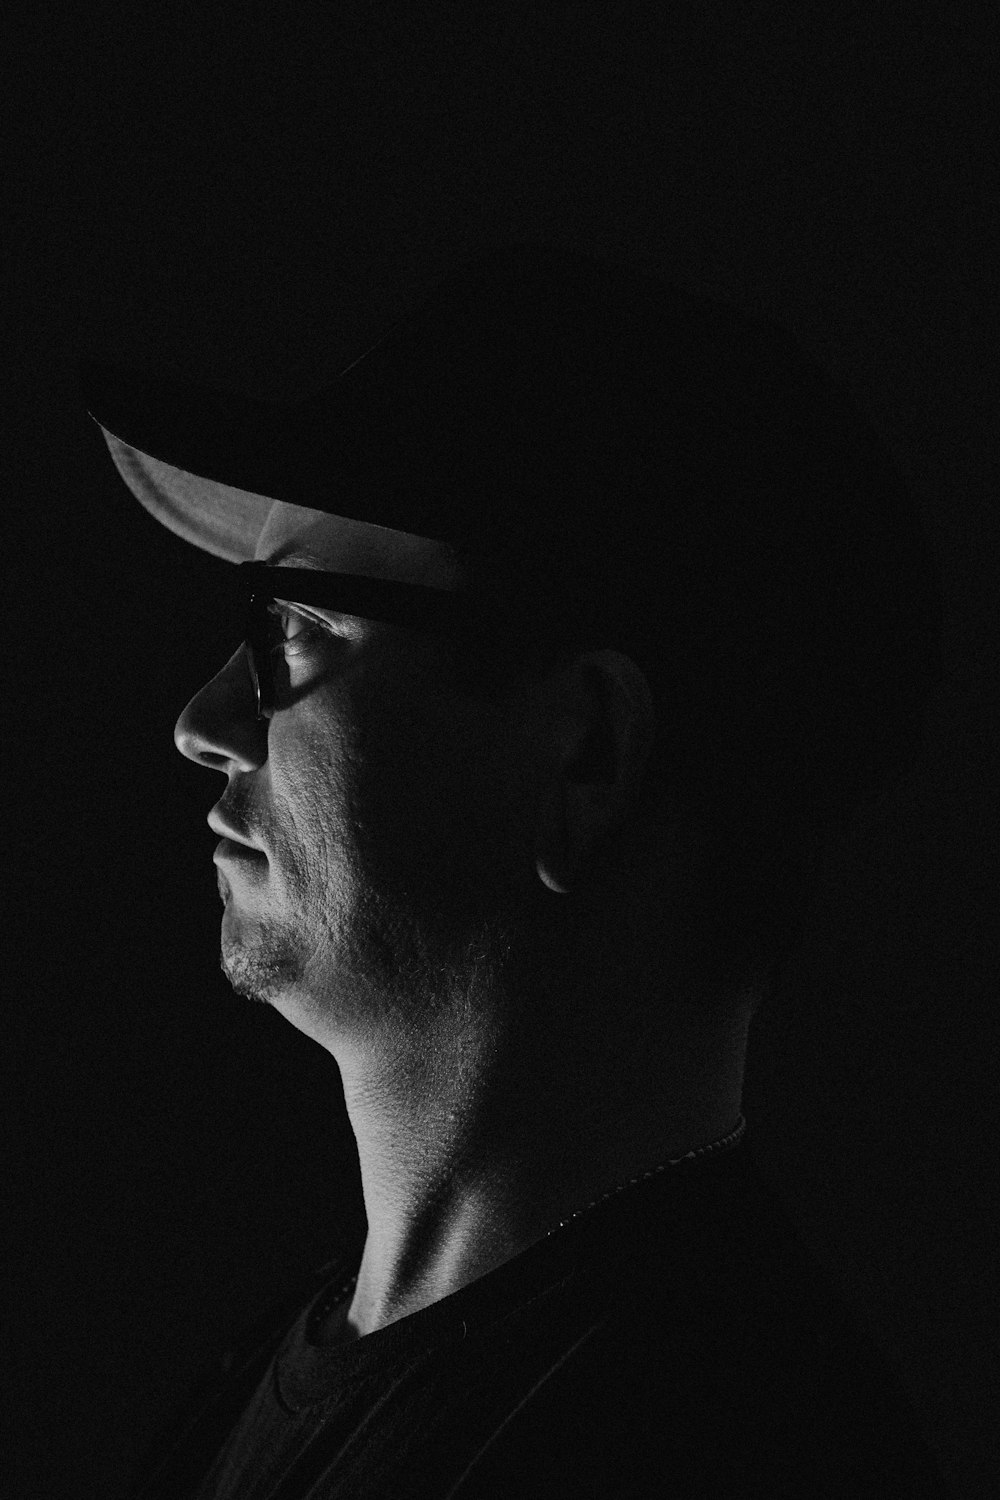 a man wearing a hat and glasses in the dark